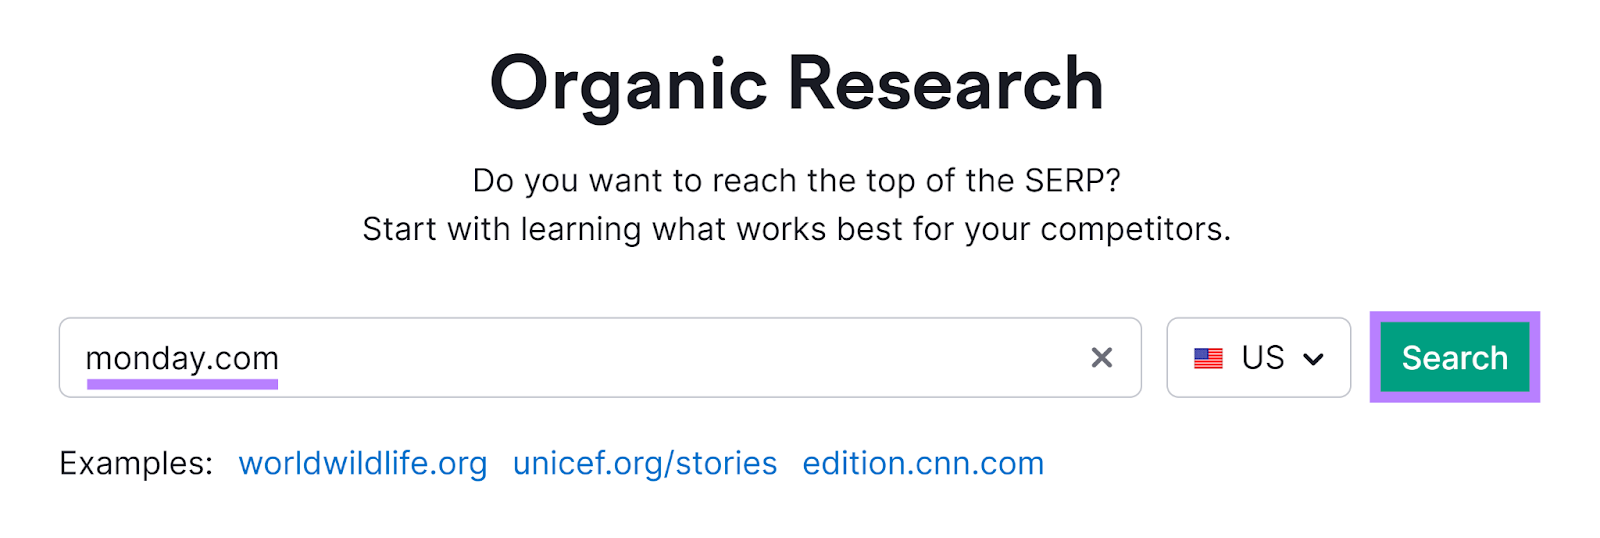 Semrush Organic Research tool start with domain and Search button highlighted.